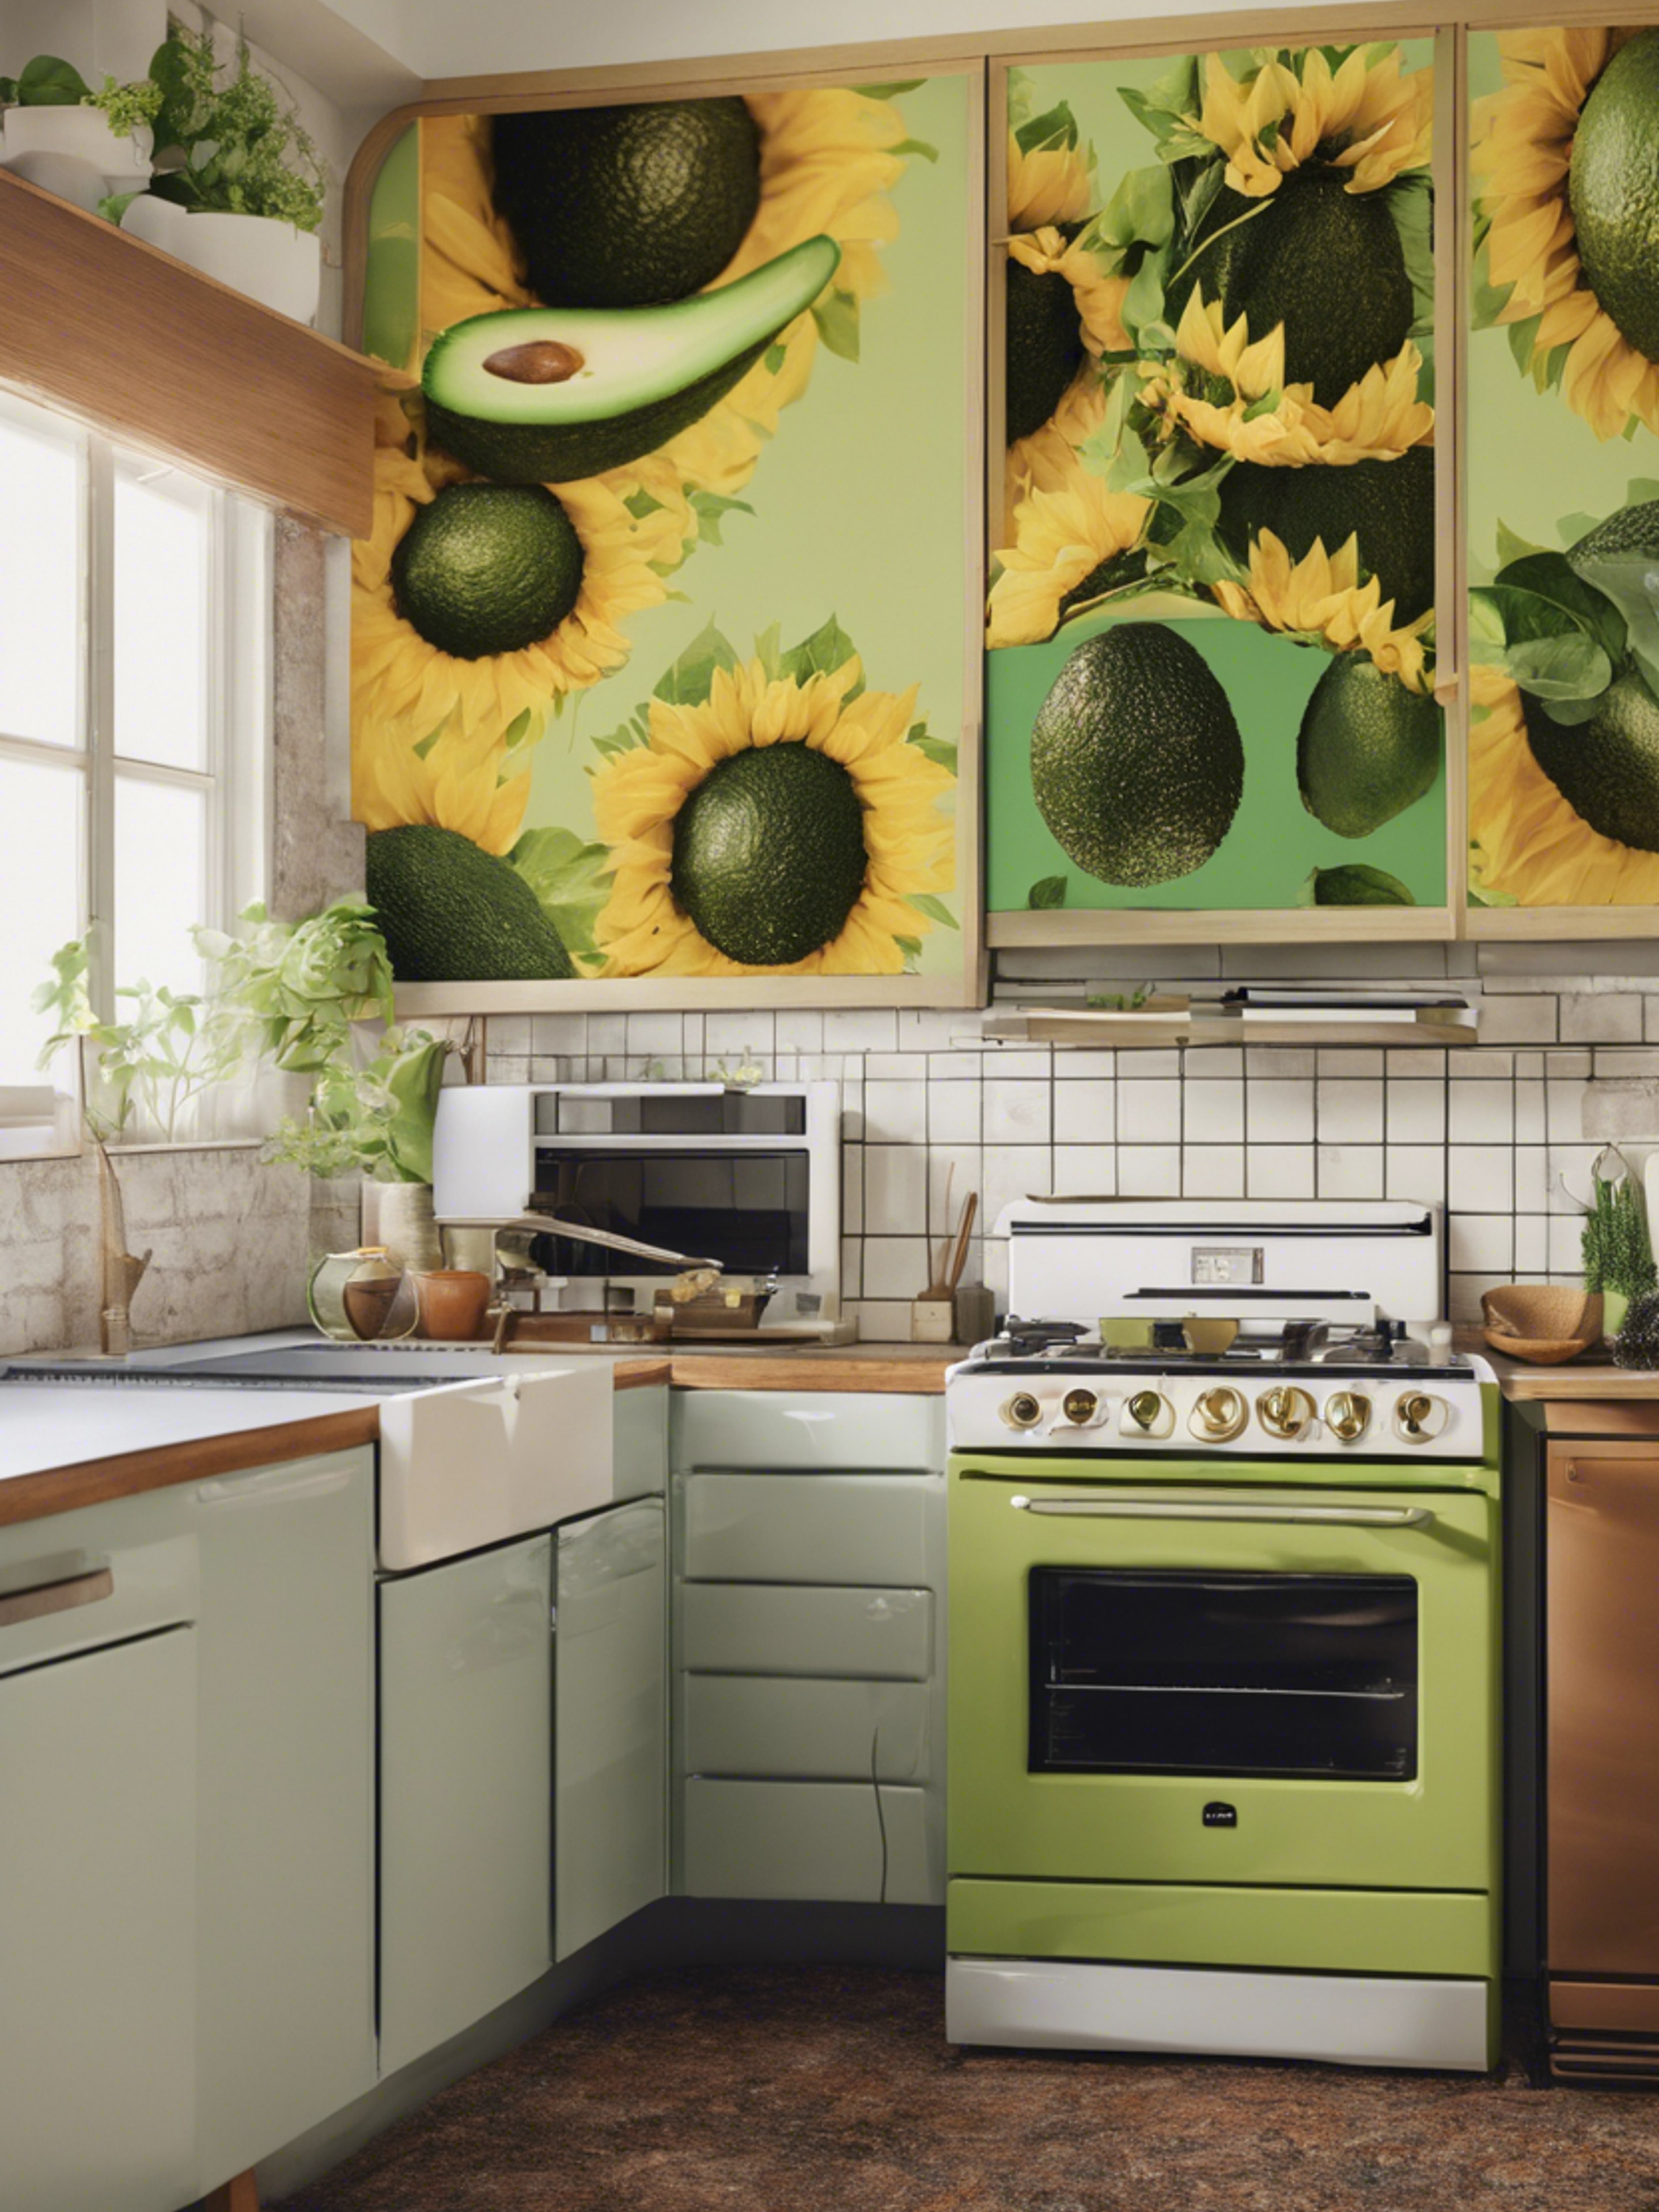 A 70s kitchen with avocado green appliances and oversized sunflower prints壁紙[58674ee3cd464da7b0a1]